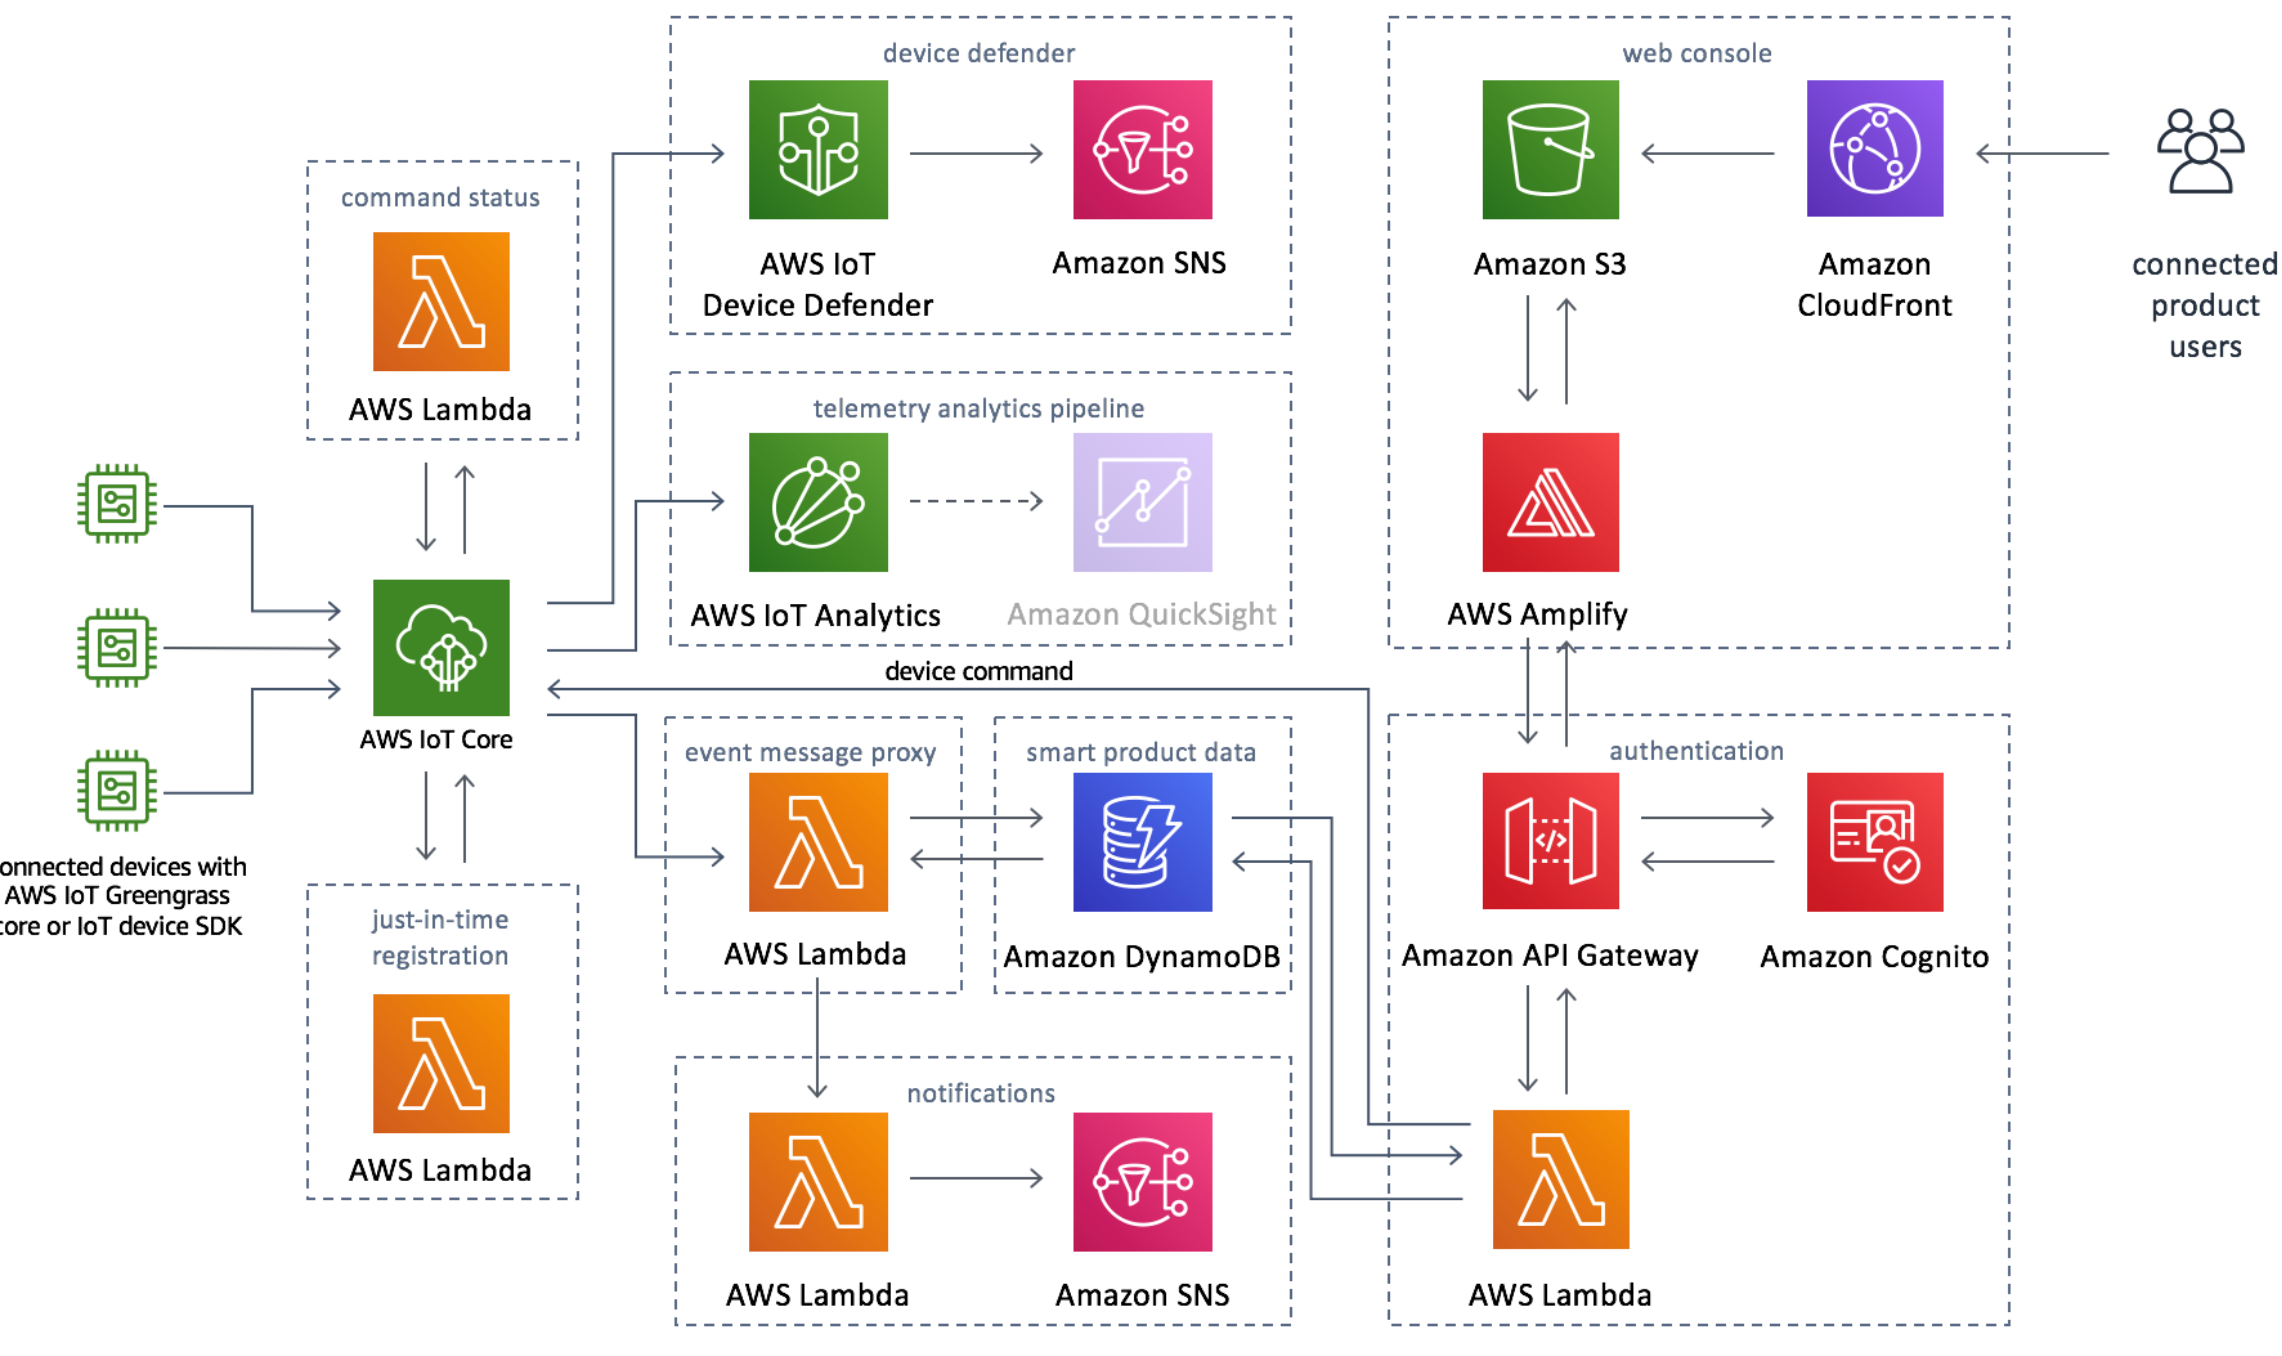 AWS-reinvent2019-Smart-product-solutions-architecture